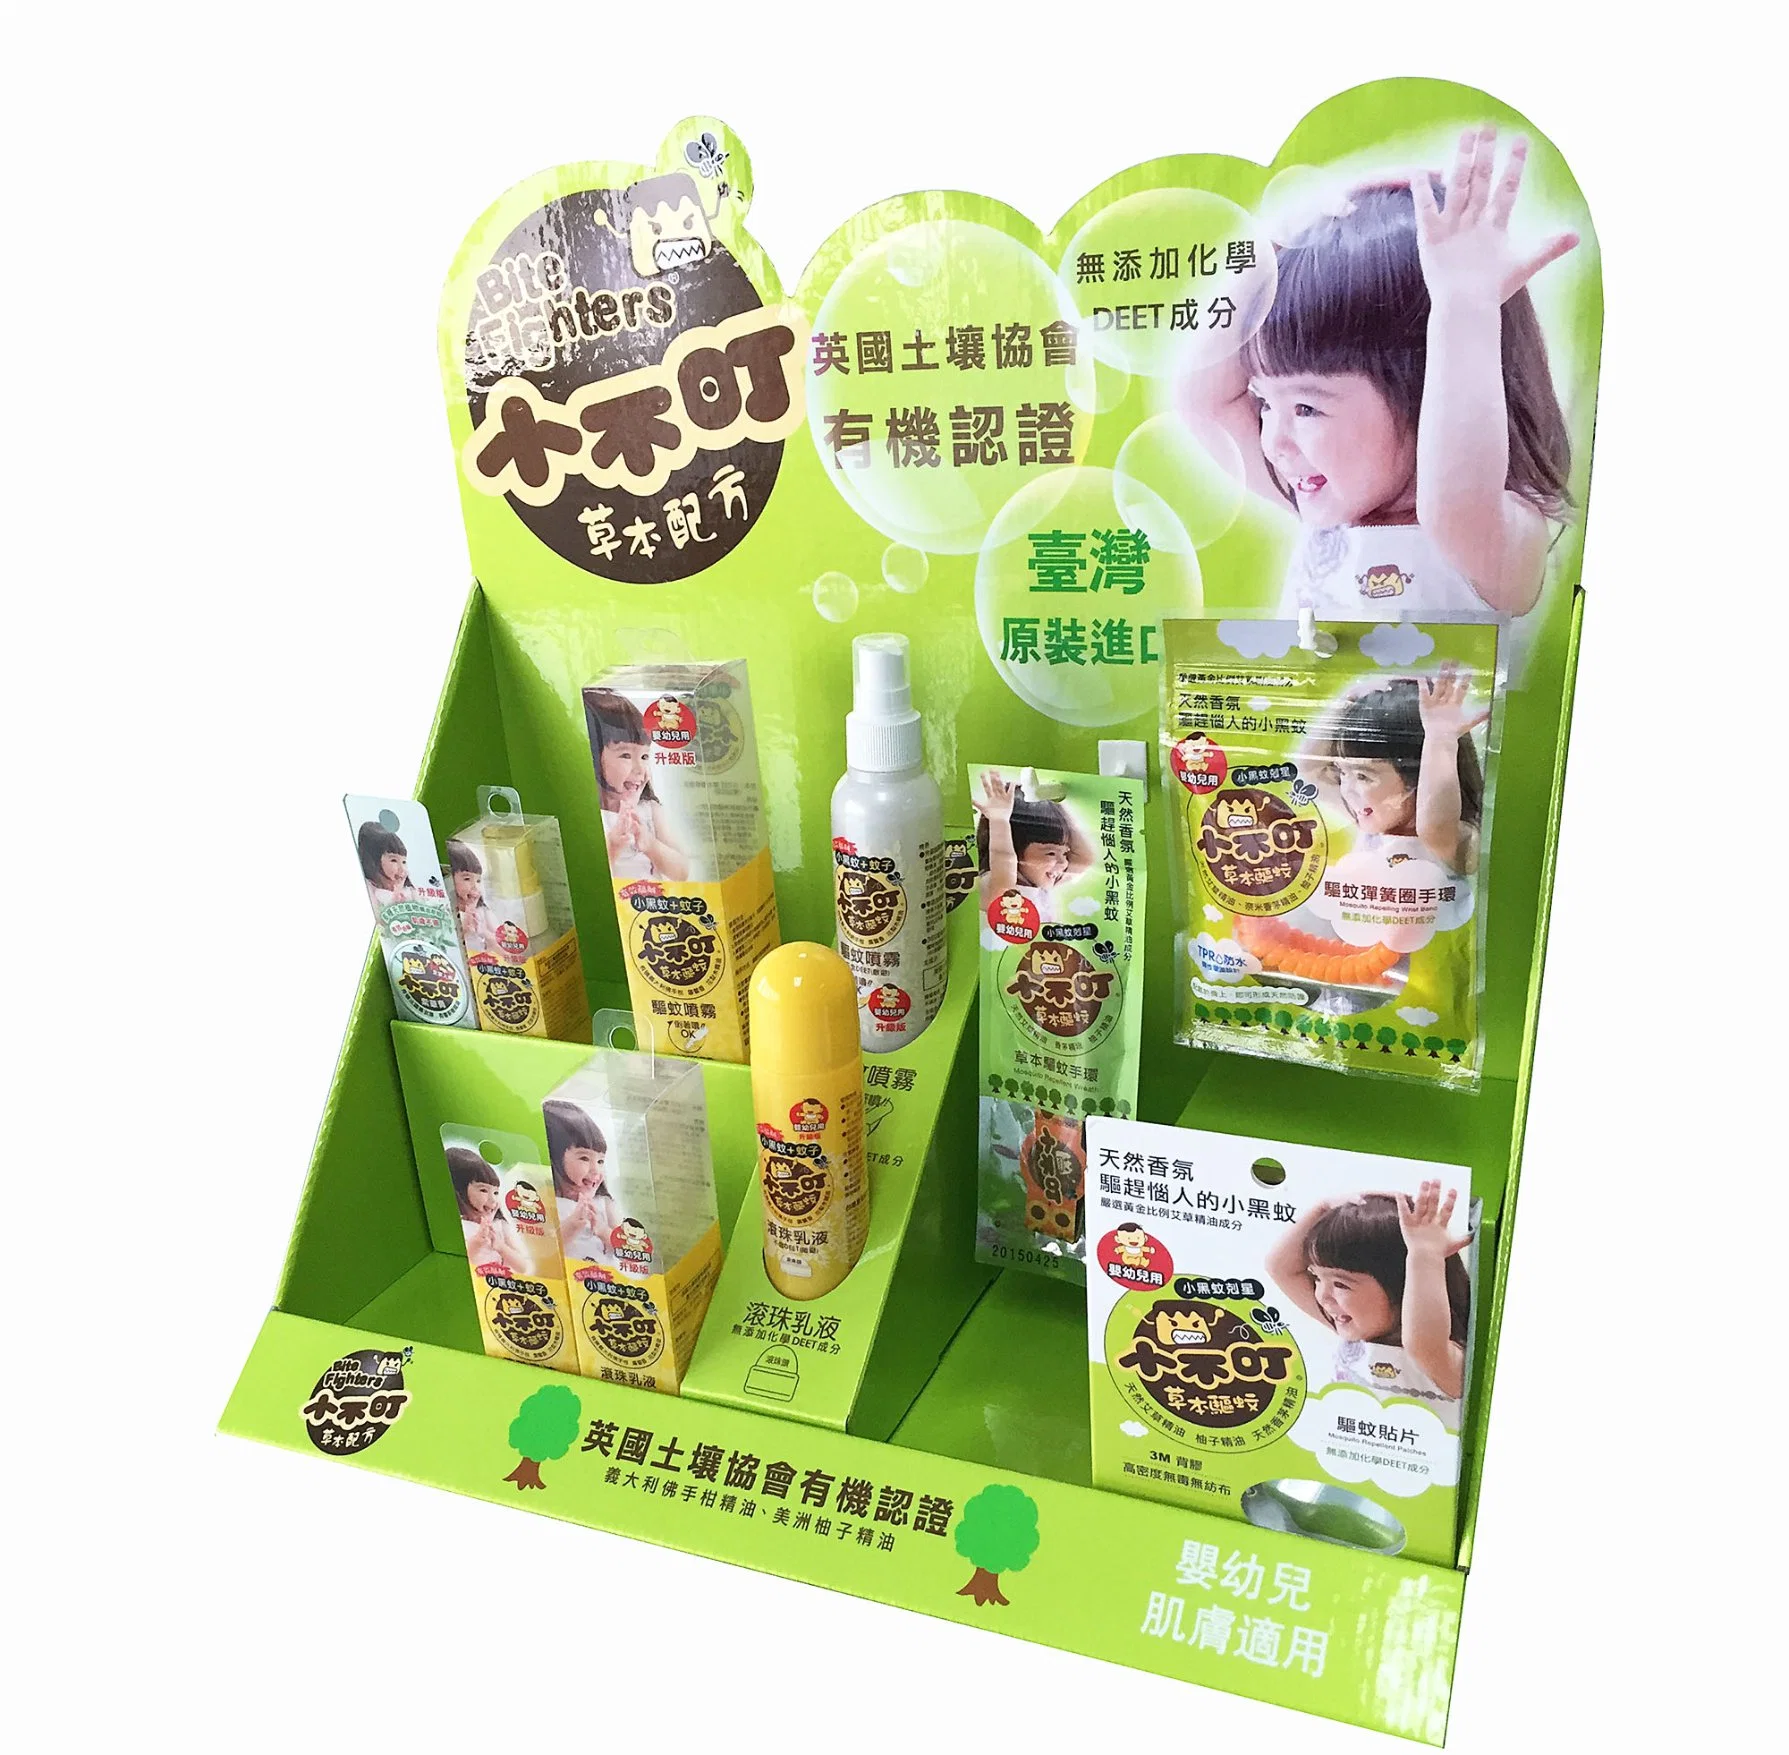 Sun Block Products Cashier Pop, Paper Tray, Counter Pop, Cardboard Display, Counter Top Display